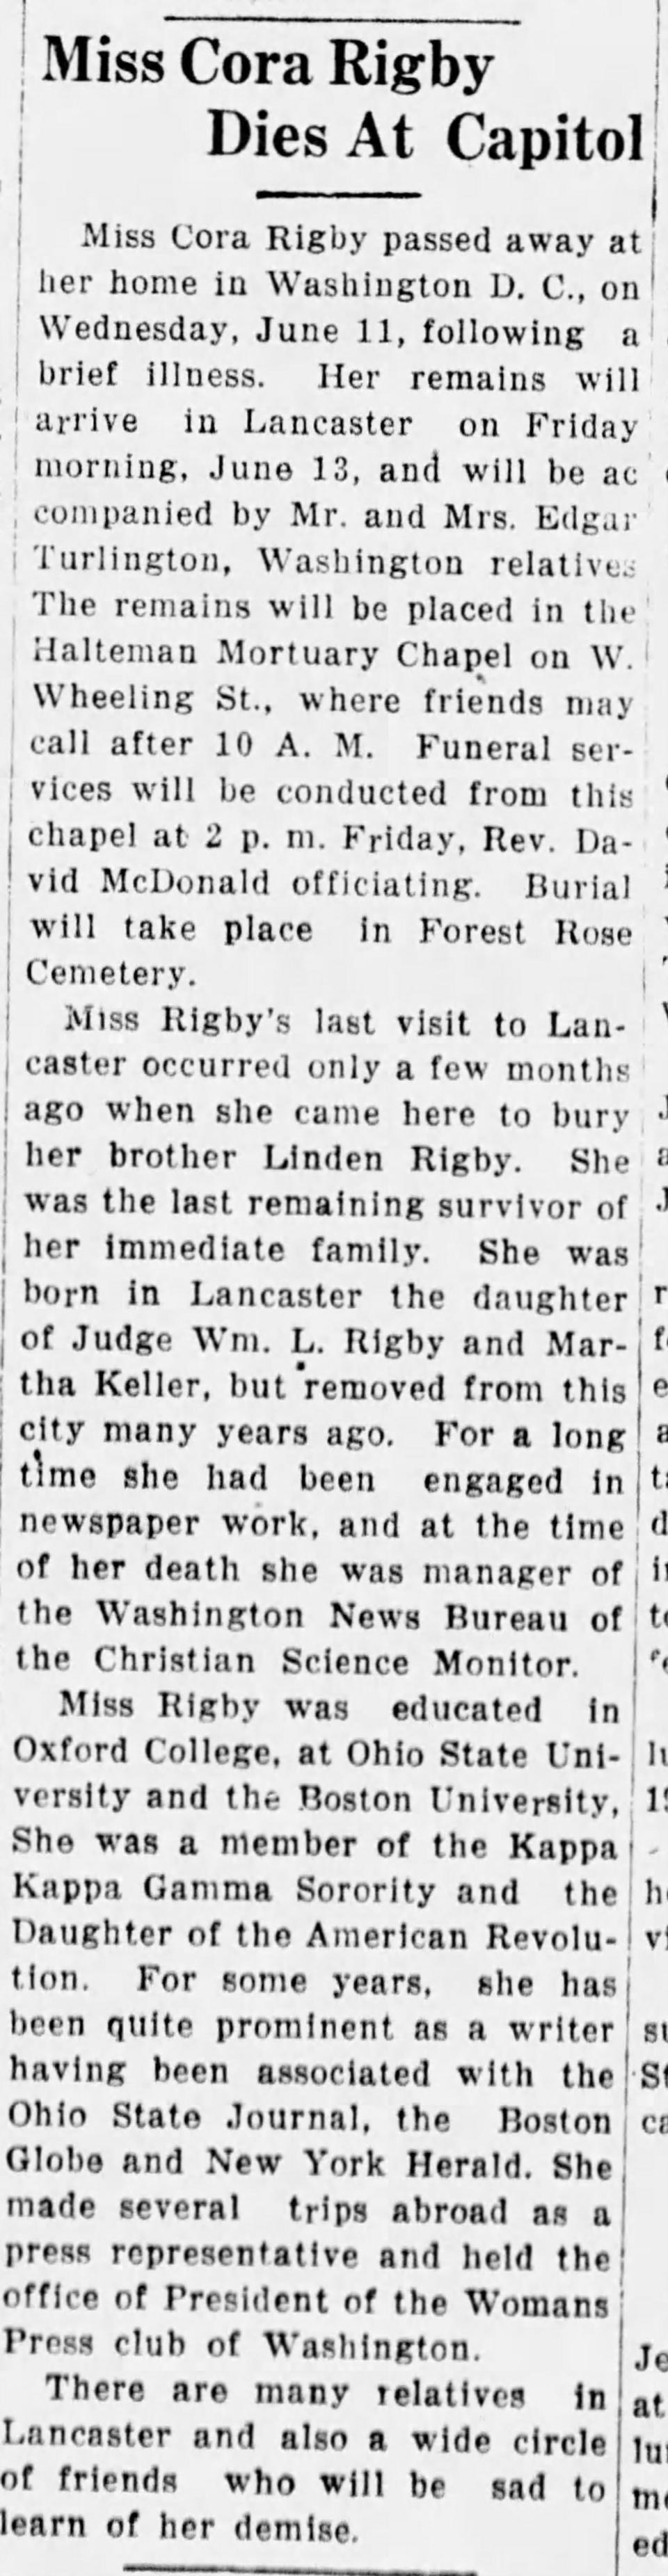 A clipping from the June 12, 1930 Eagle-Gazette.